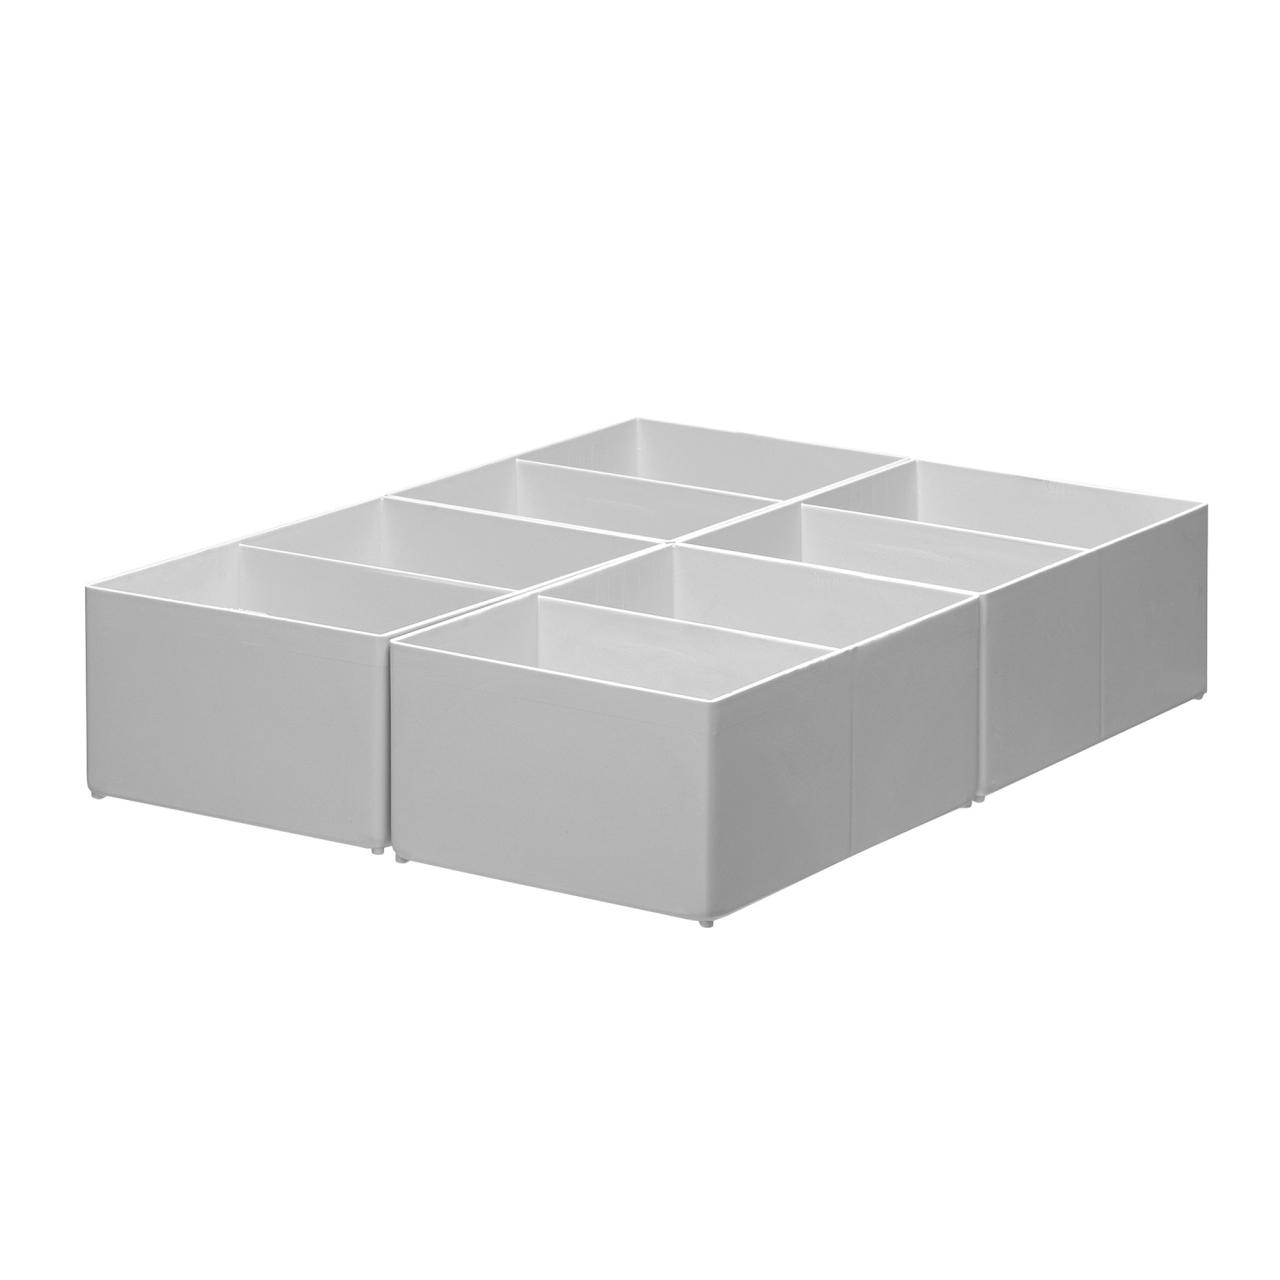 Insert Boxes, high, 4 boxes per drawer, 2 compartments